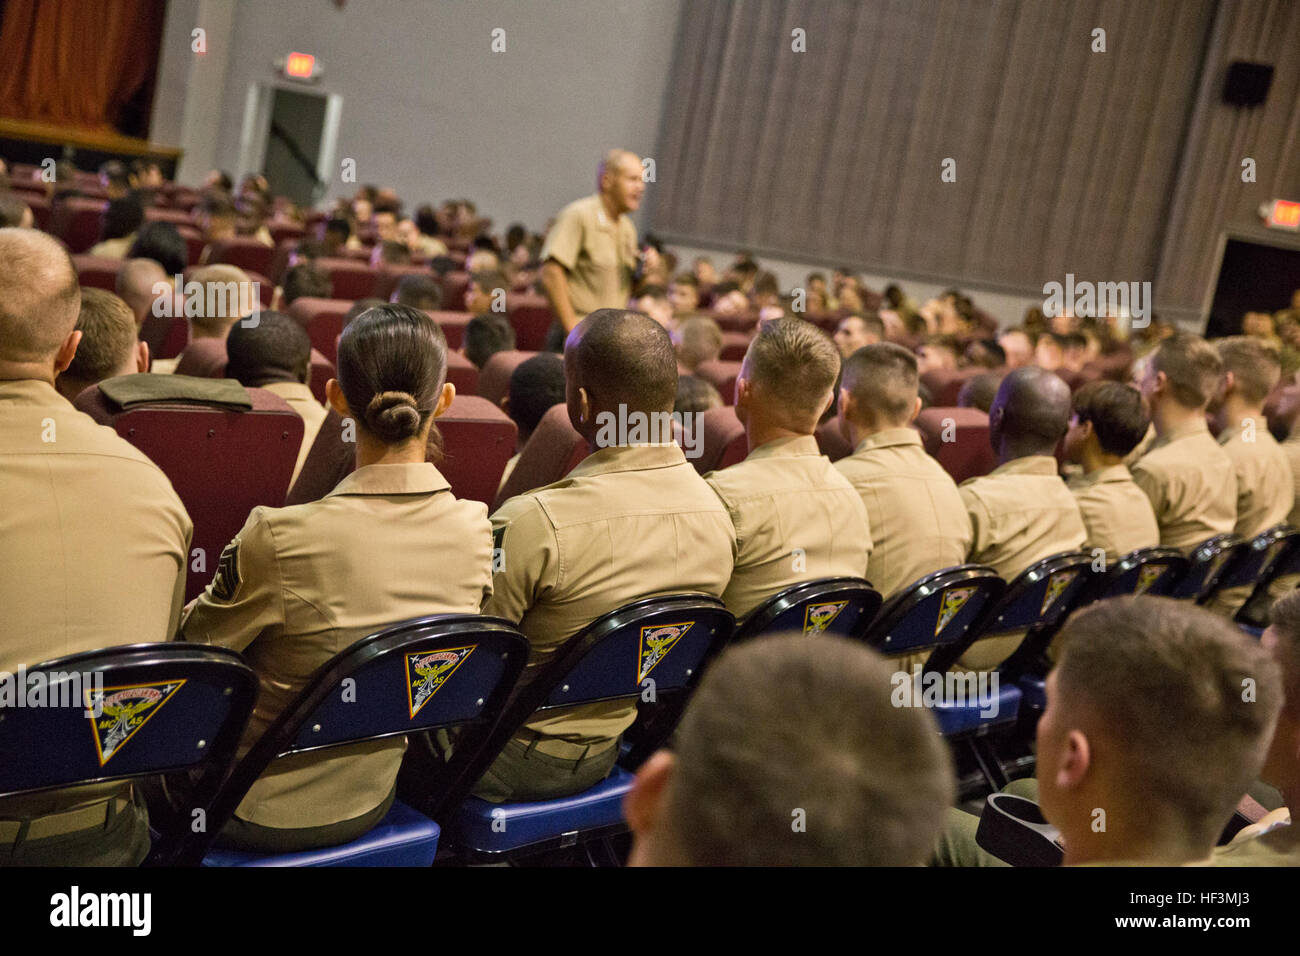 U.S. Marines listen to Commandant of the Marine Corps Gen. Robert B. Neller speak at Marine Corps Air Station Beaufort, S.C., Oct. 16, 2015. Neller outlined the Corps' current priorities and expectations, and listened to and answered questions during his visit. (U.S. Marine Corps photo by Sgt. Gabriela Garcia/Released) CMC Visits MCRD Parris Island and MCAS Beaufort 151016-M-SA716-285 Stock Photo